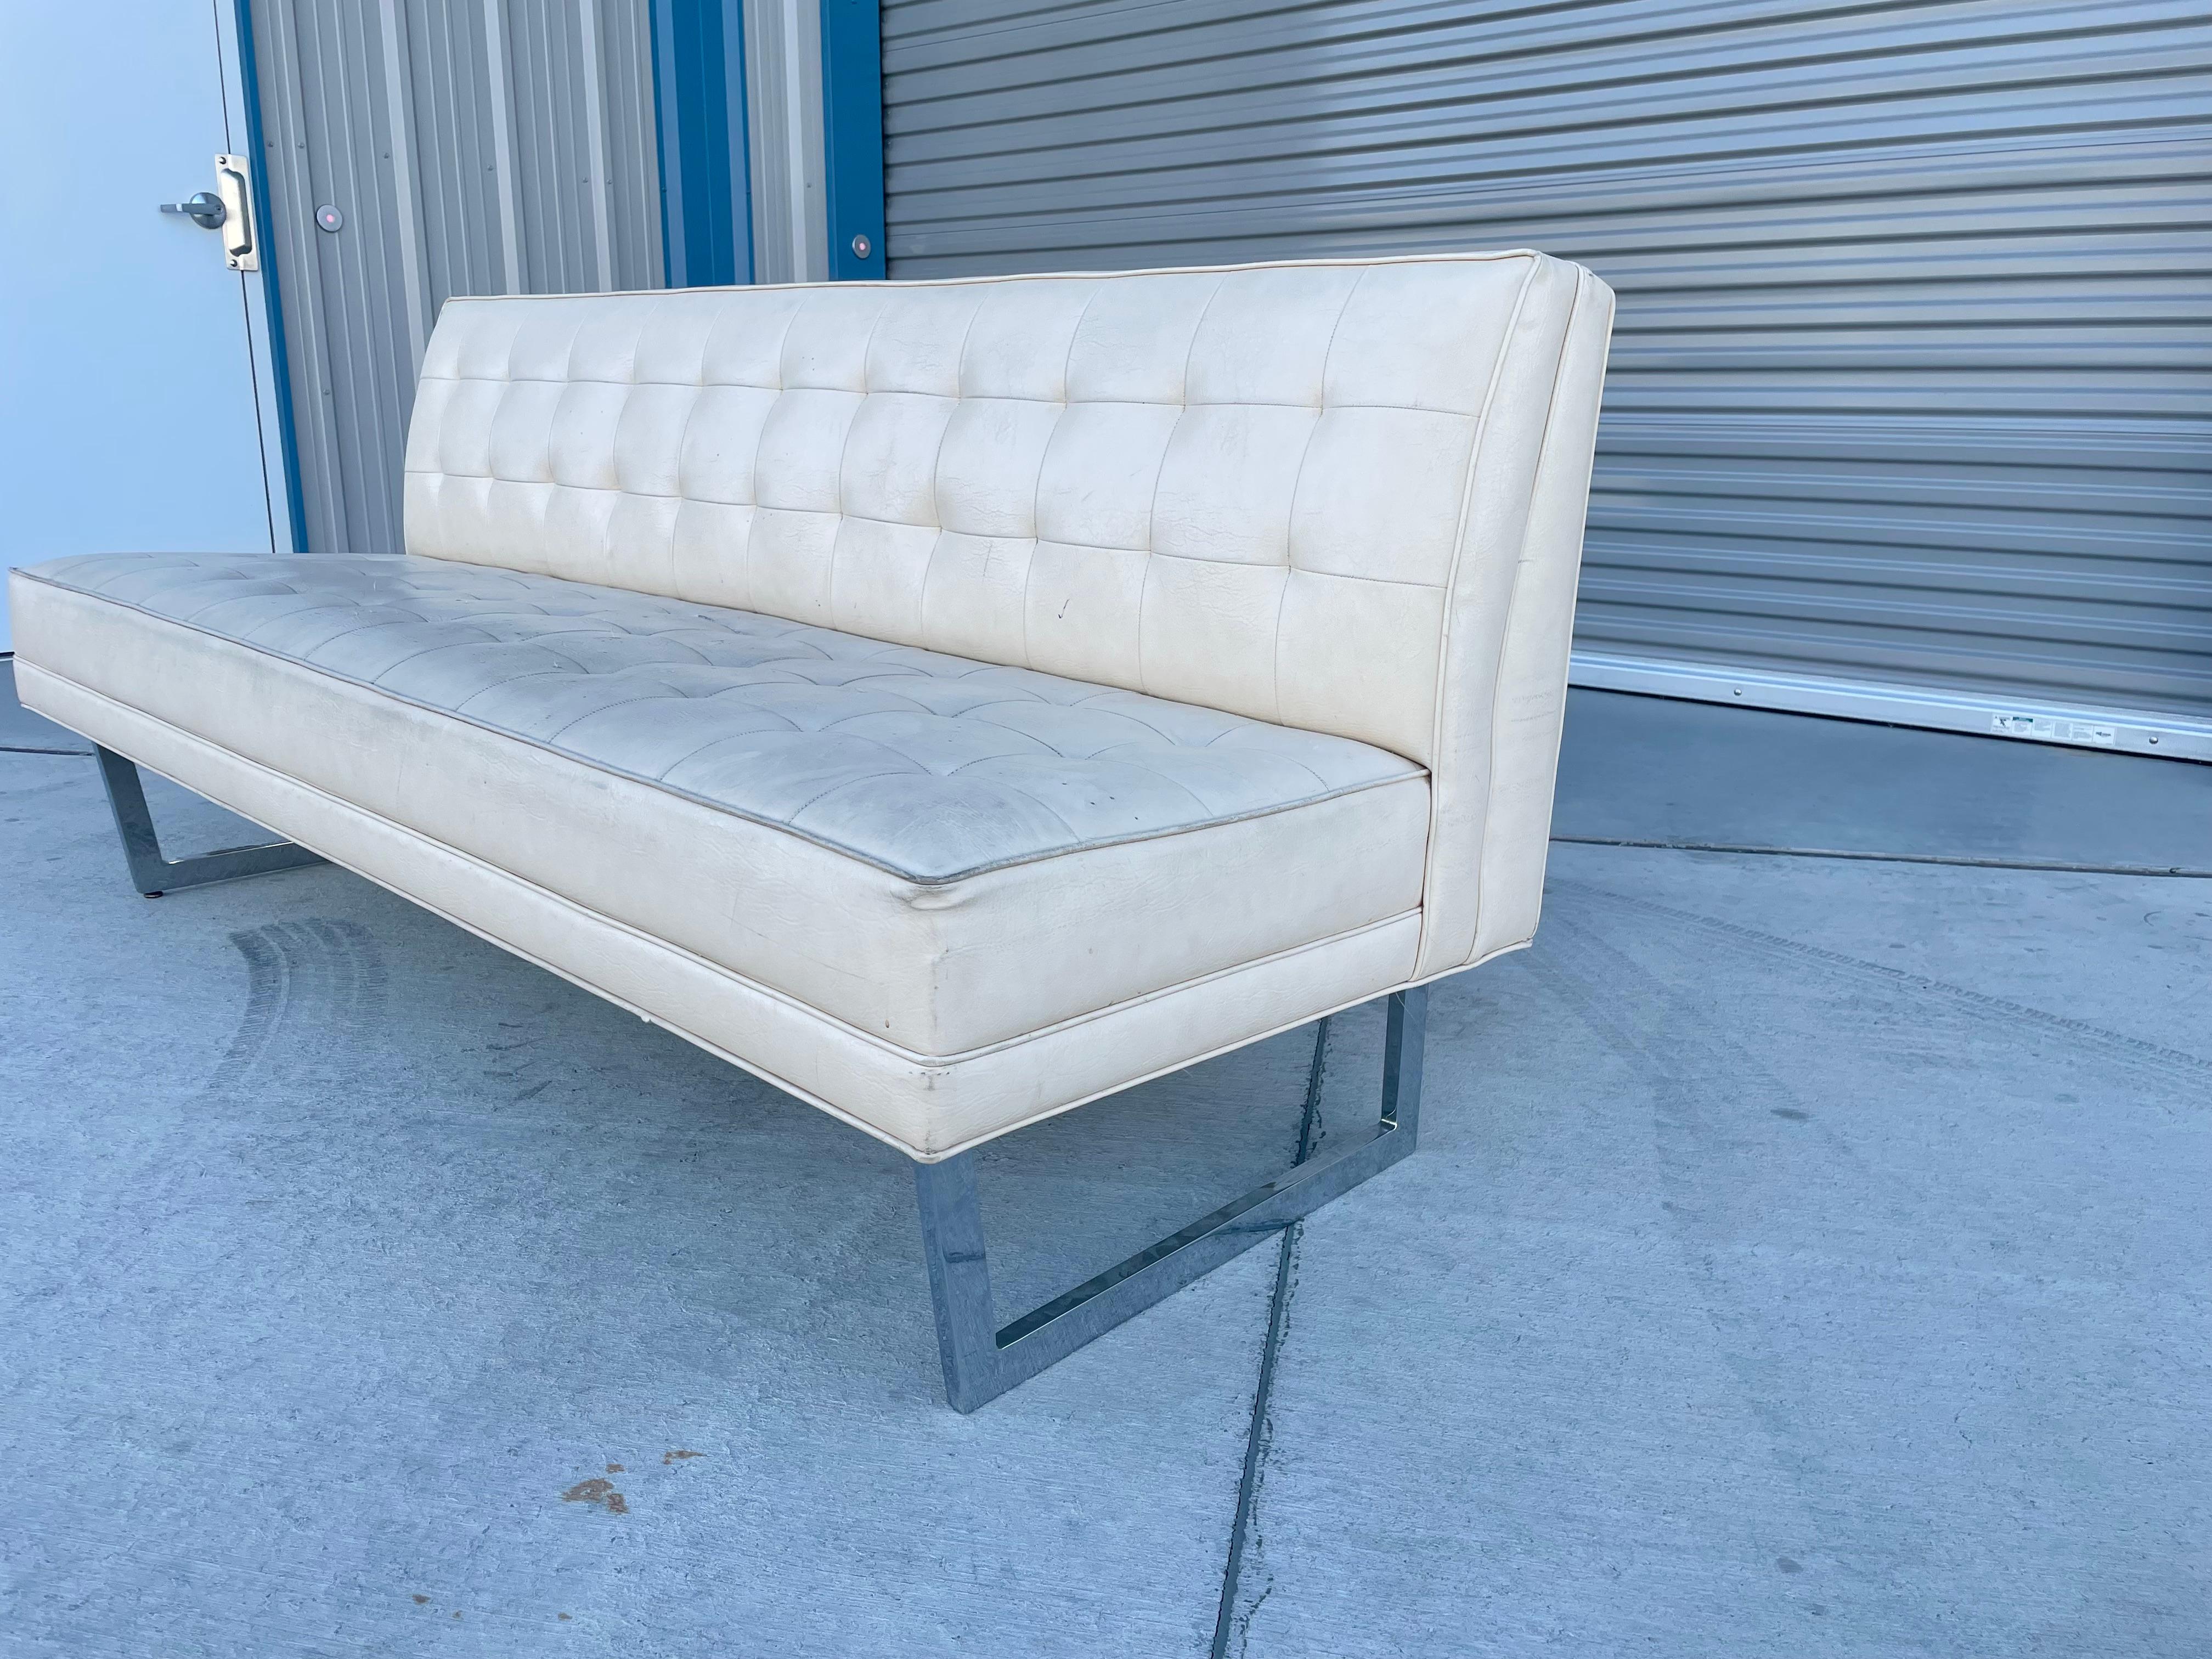 1970s Mid Century Modern Chrome Sofa In Good Condition For Sale In North Hollywood, CA